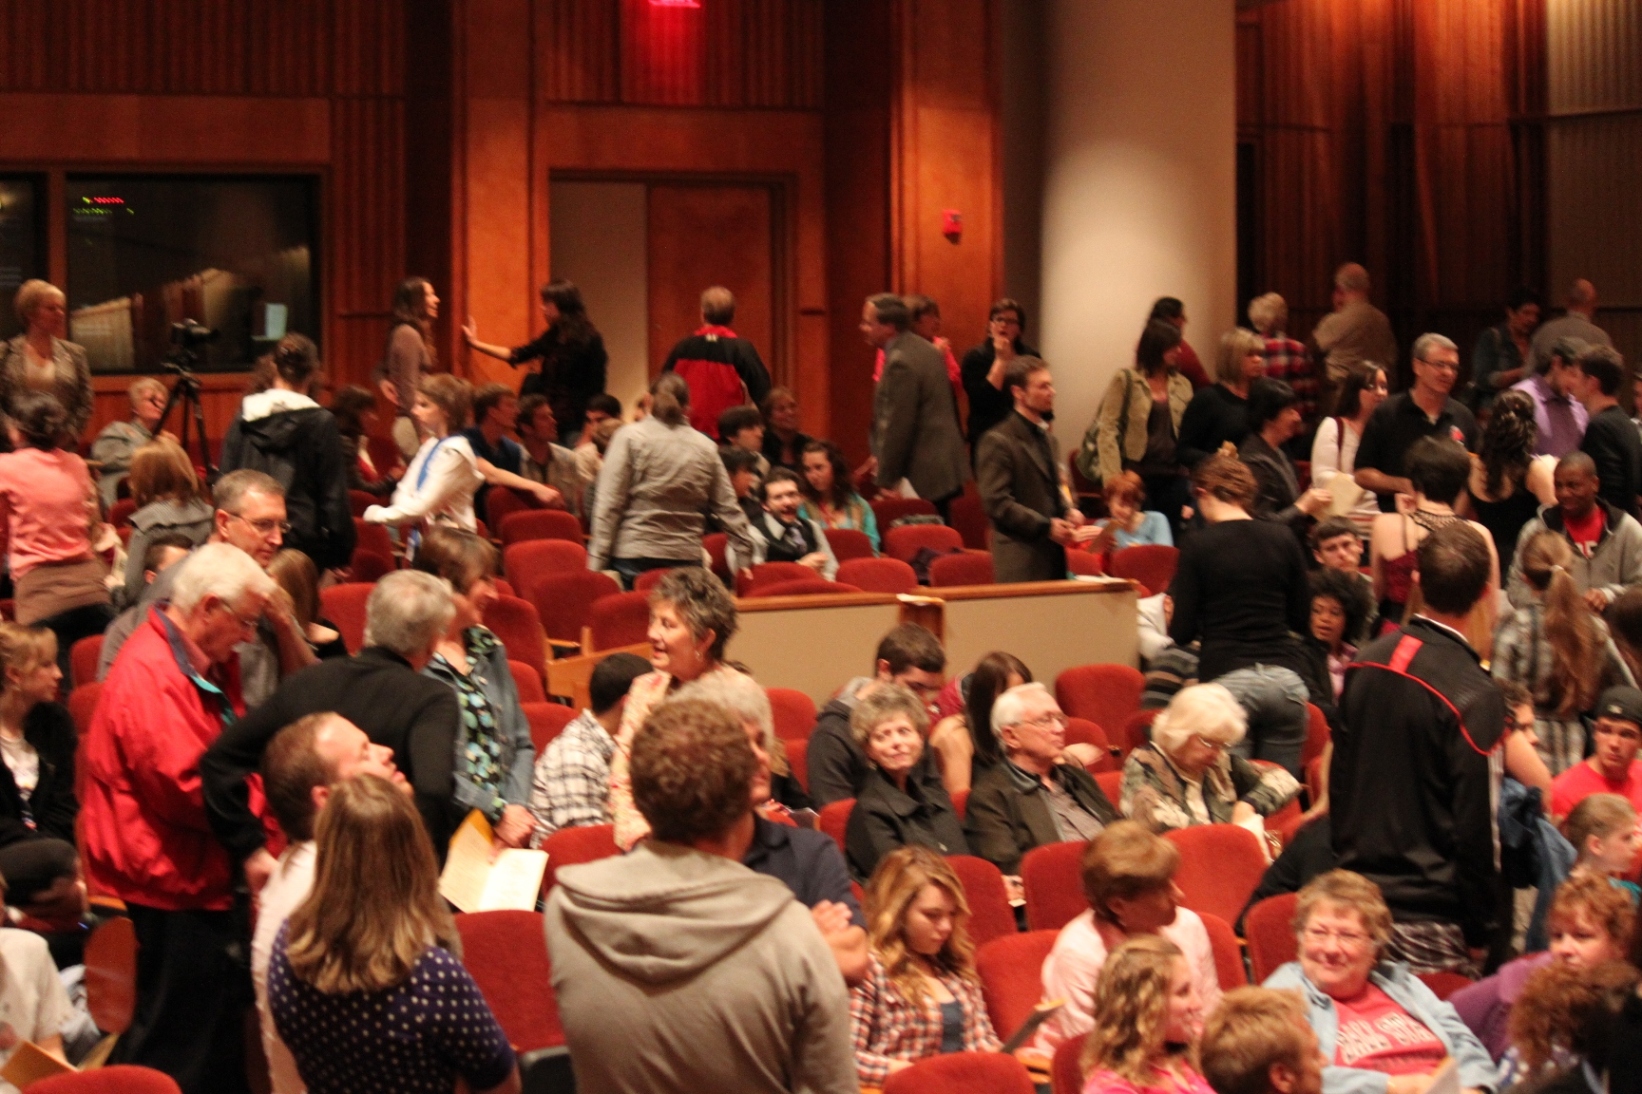 2010, Pruis Hall, Ball State University, a full house for the first reading of The Circus in Winter